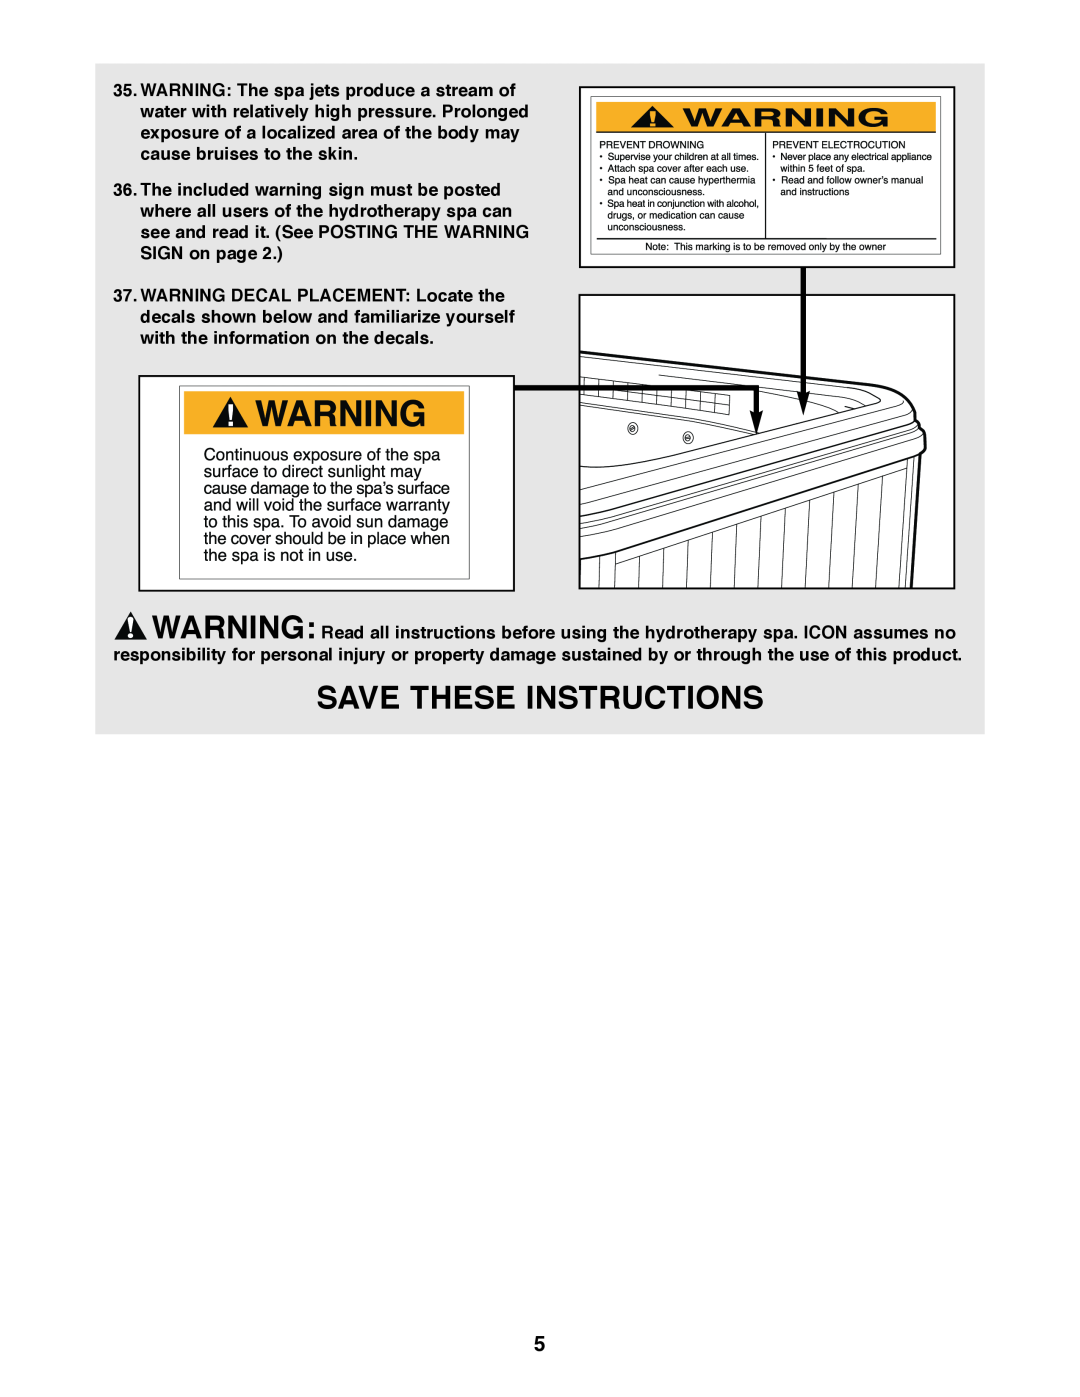 Image IMSW73910 user manual Save These Instructions 